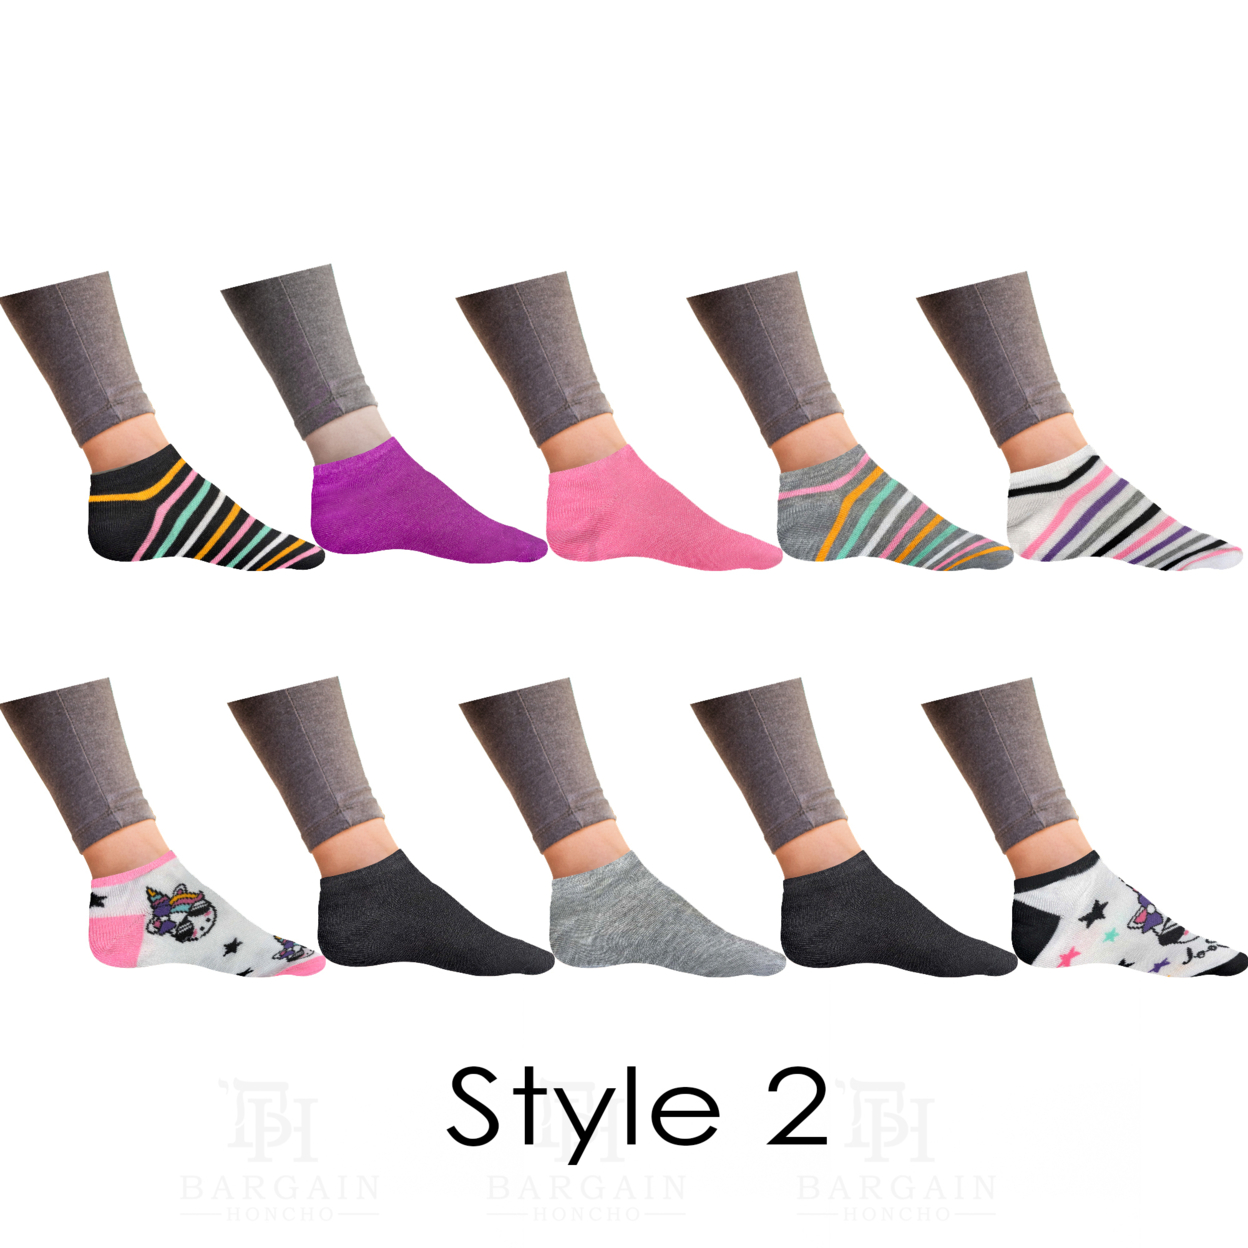 20-Pairs: Women’s Breathable Colorful Fun No Show Low Cut Ankle Socks - 3 & 5